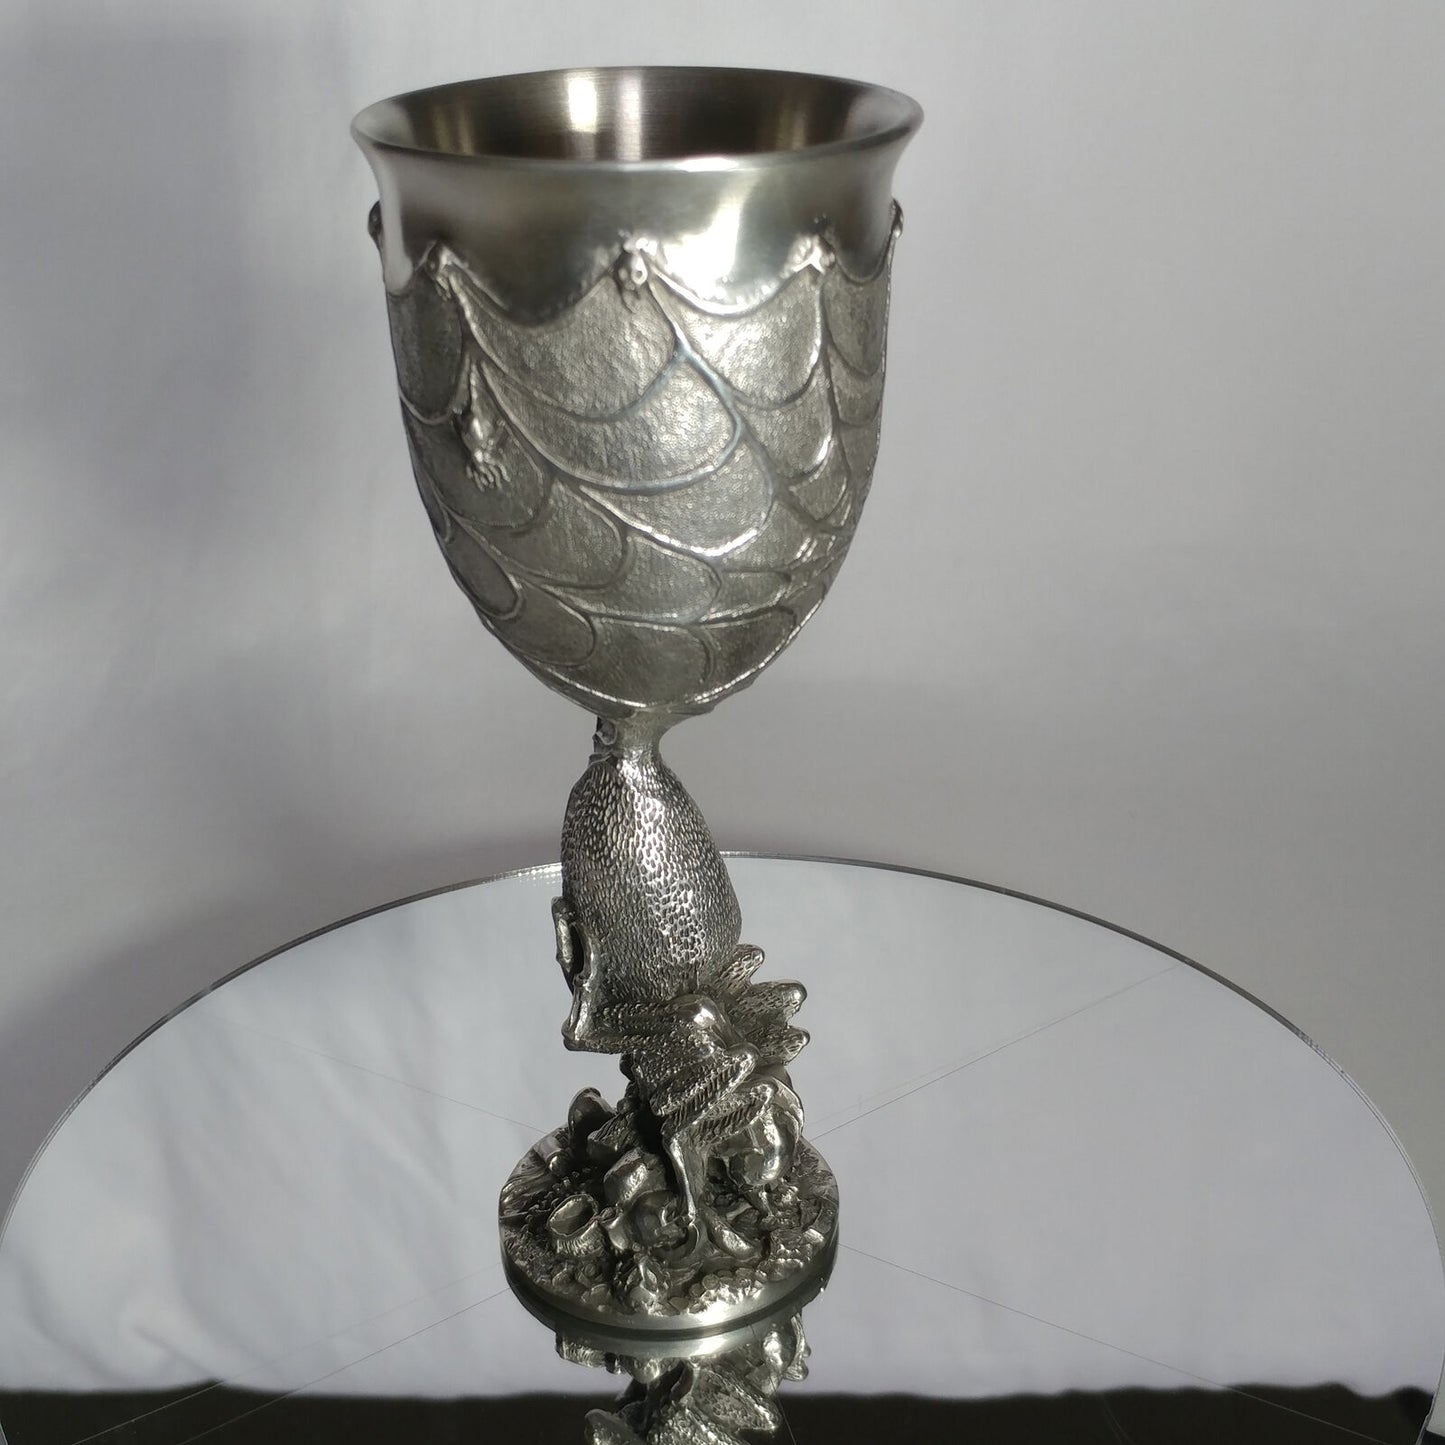 Royal Selangor | Lord of the Rings | Smaug Goblet 272506